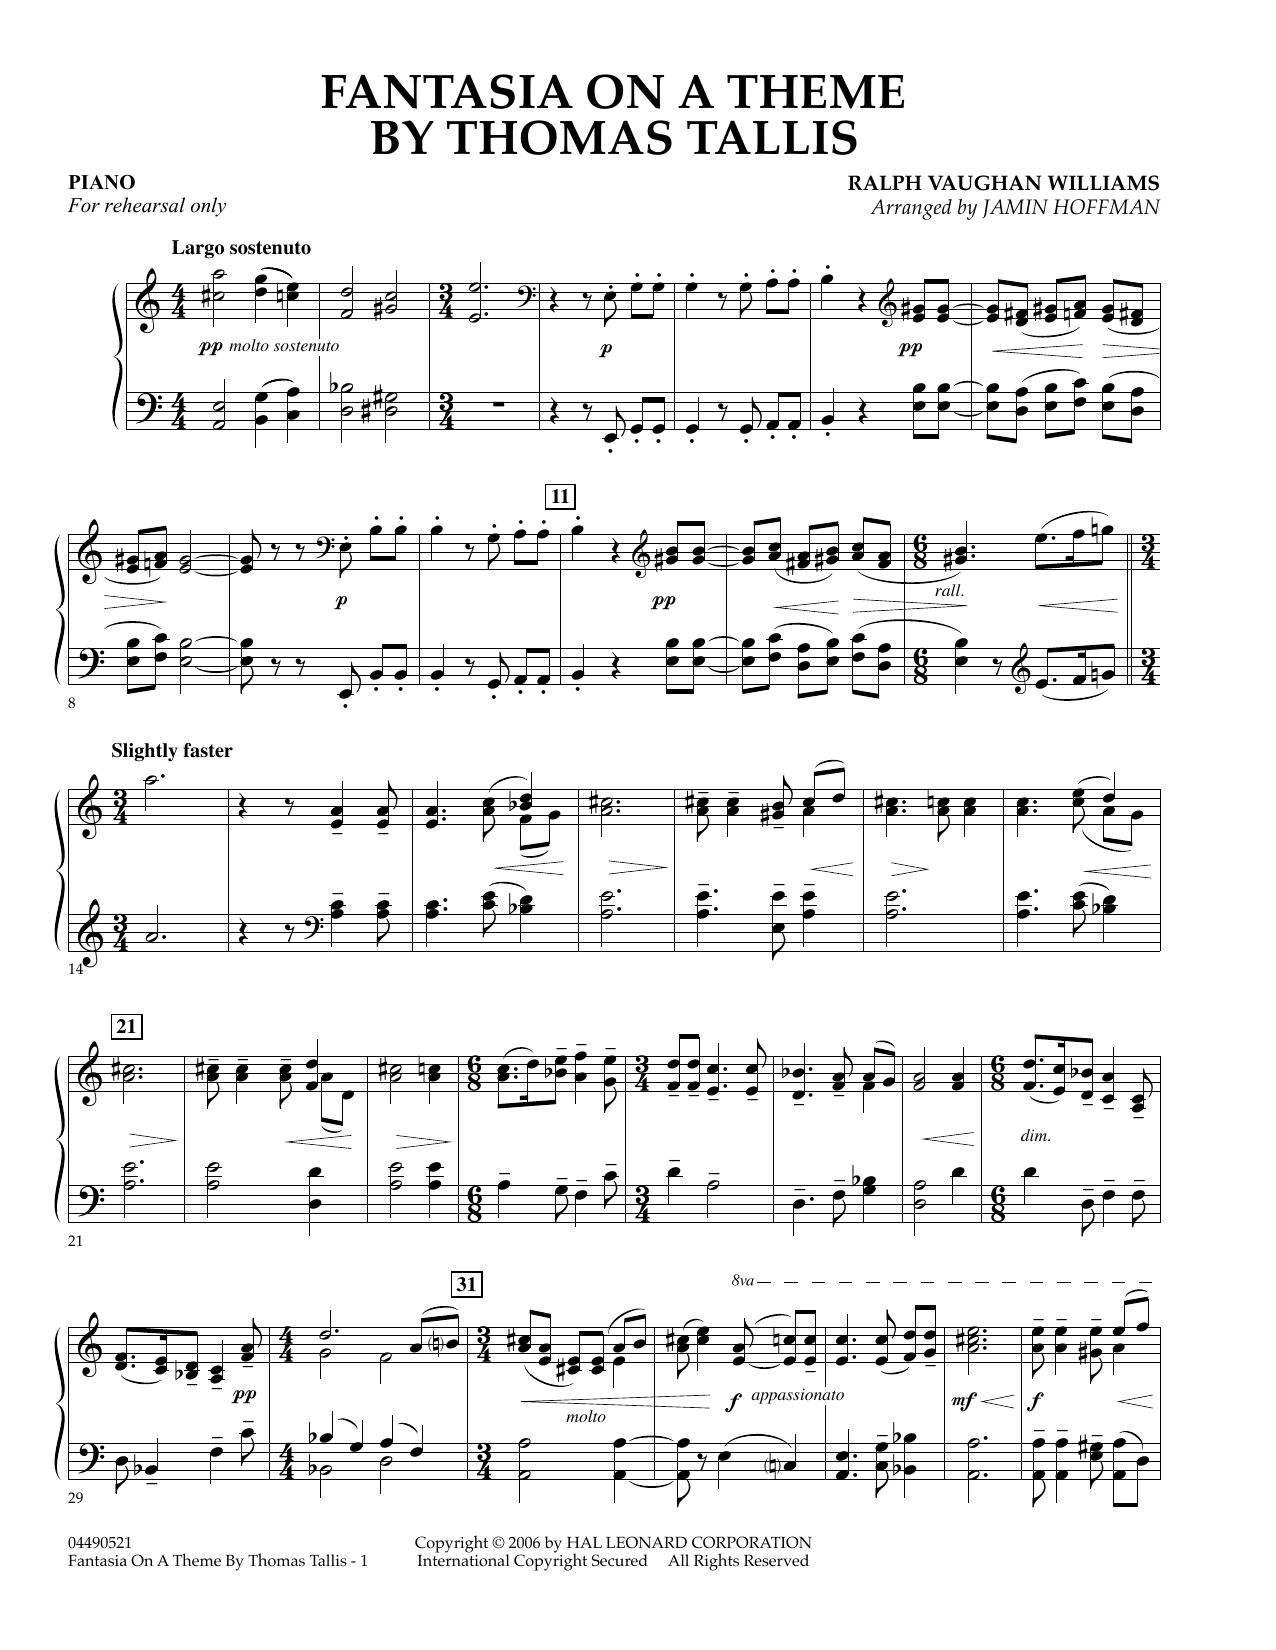 Jamin Hoffman Fantasia on a Theme by Thomas Tallis - Piano sheet music preview music notes and score for Orchestra including 2 page(s)